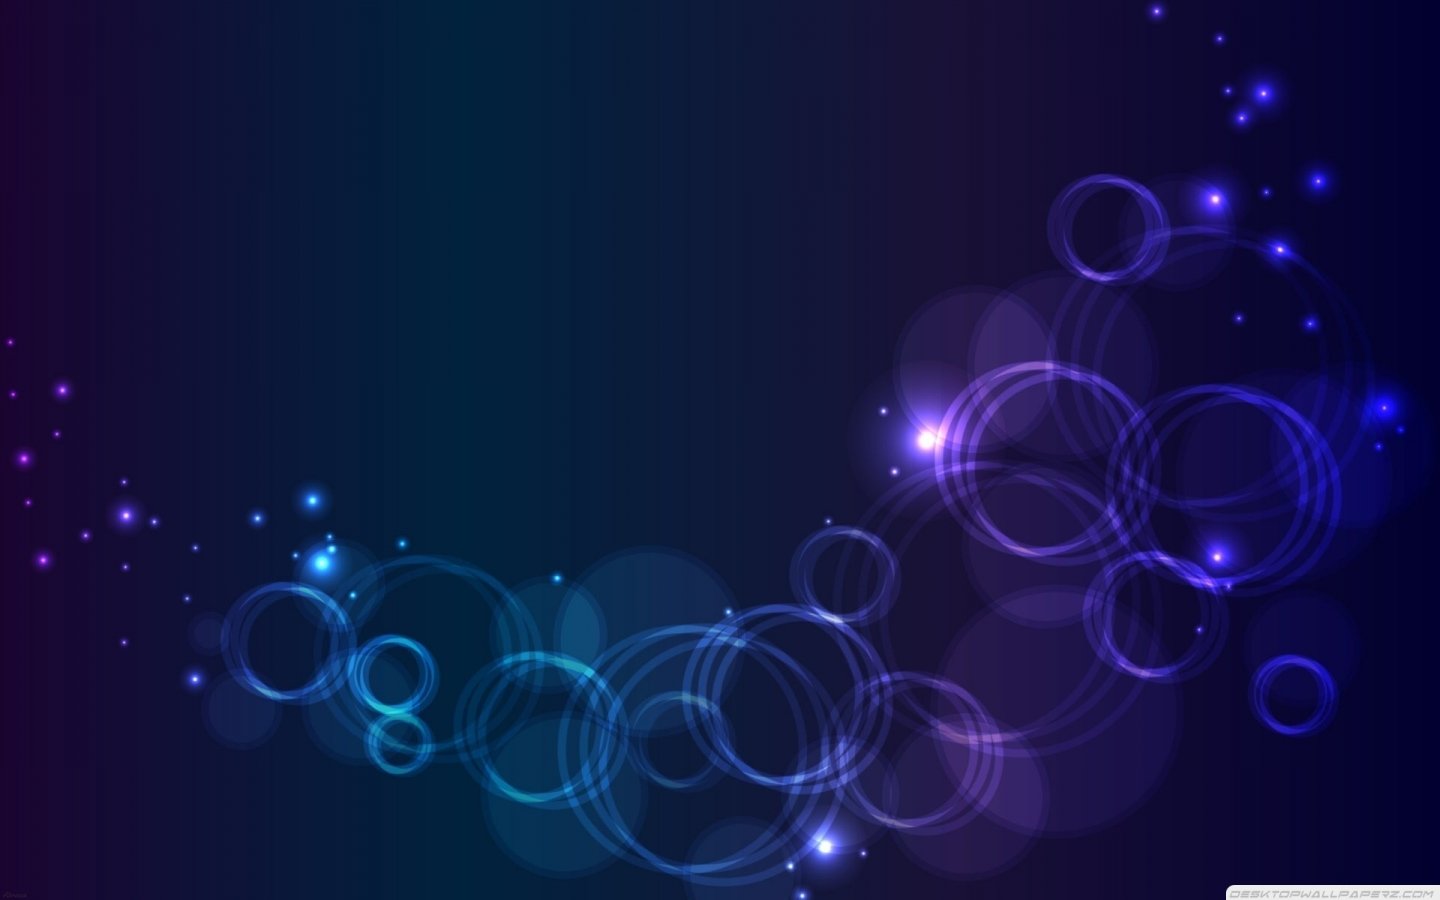 Blue And Purple Abstract Circles 1440900 56404 HD Wallpaper Res 1440x900